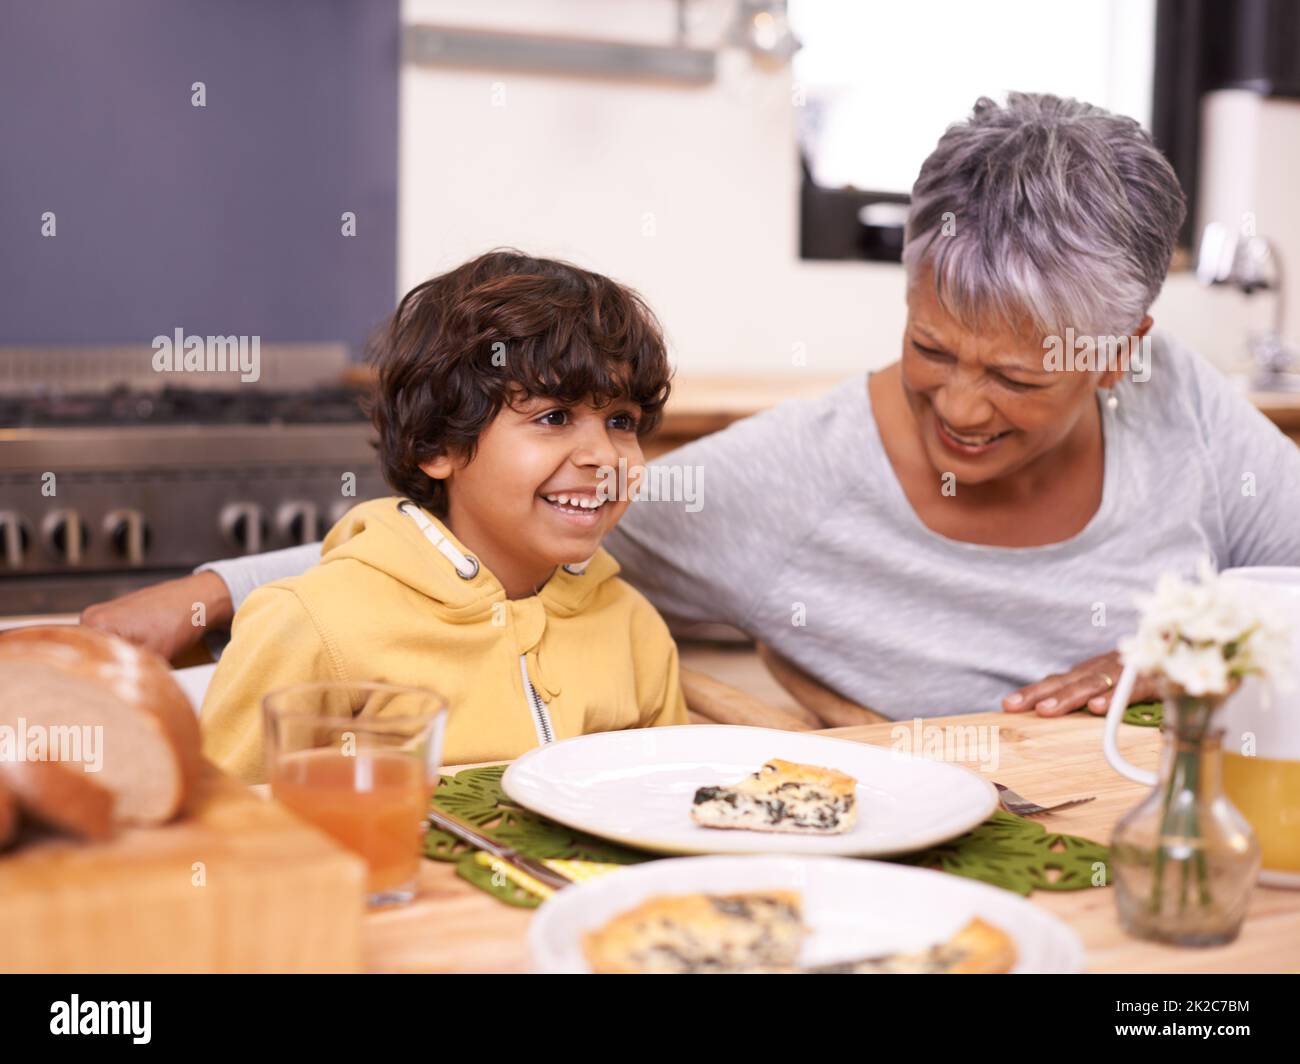 Grannys quiche is the best. A cute little boy eating a meal with his grandmother at home. Stock Photo